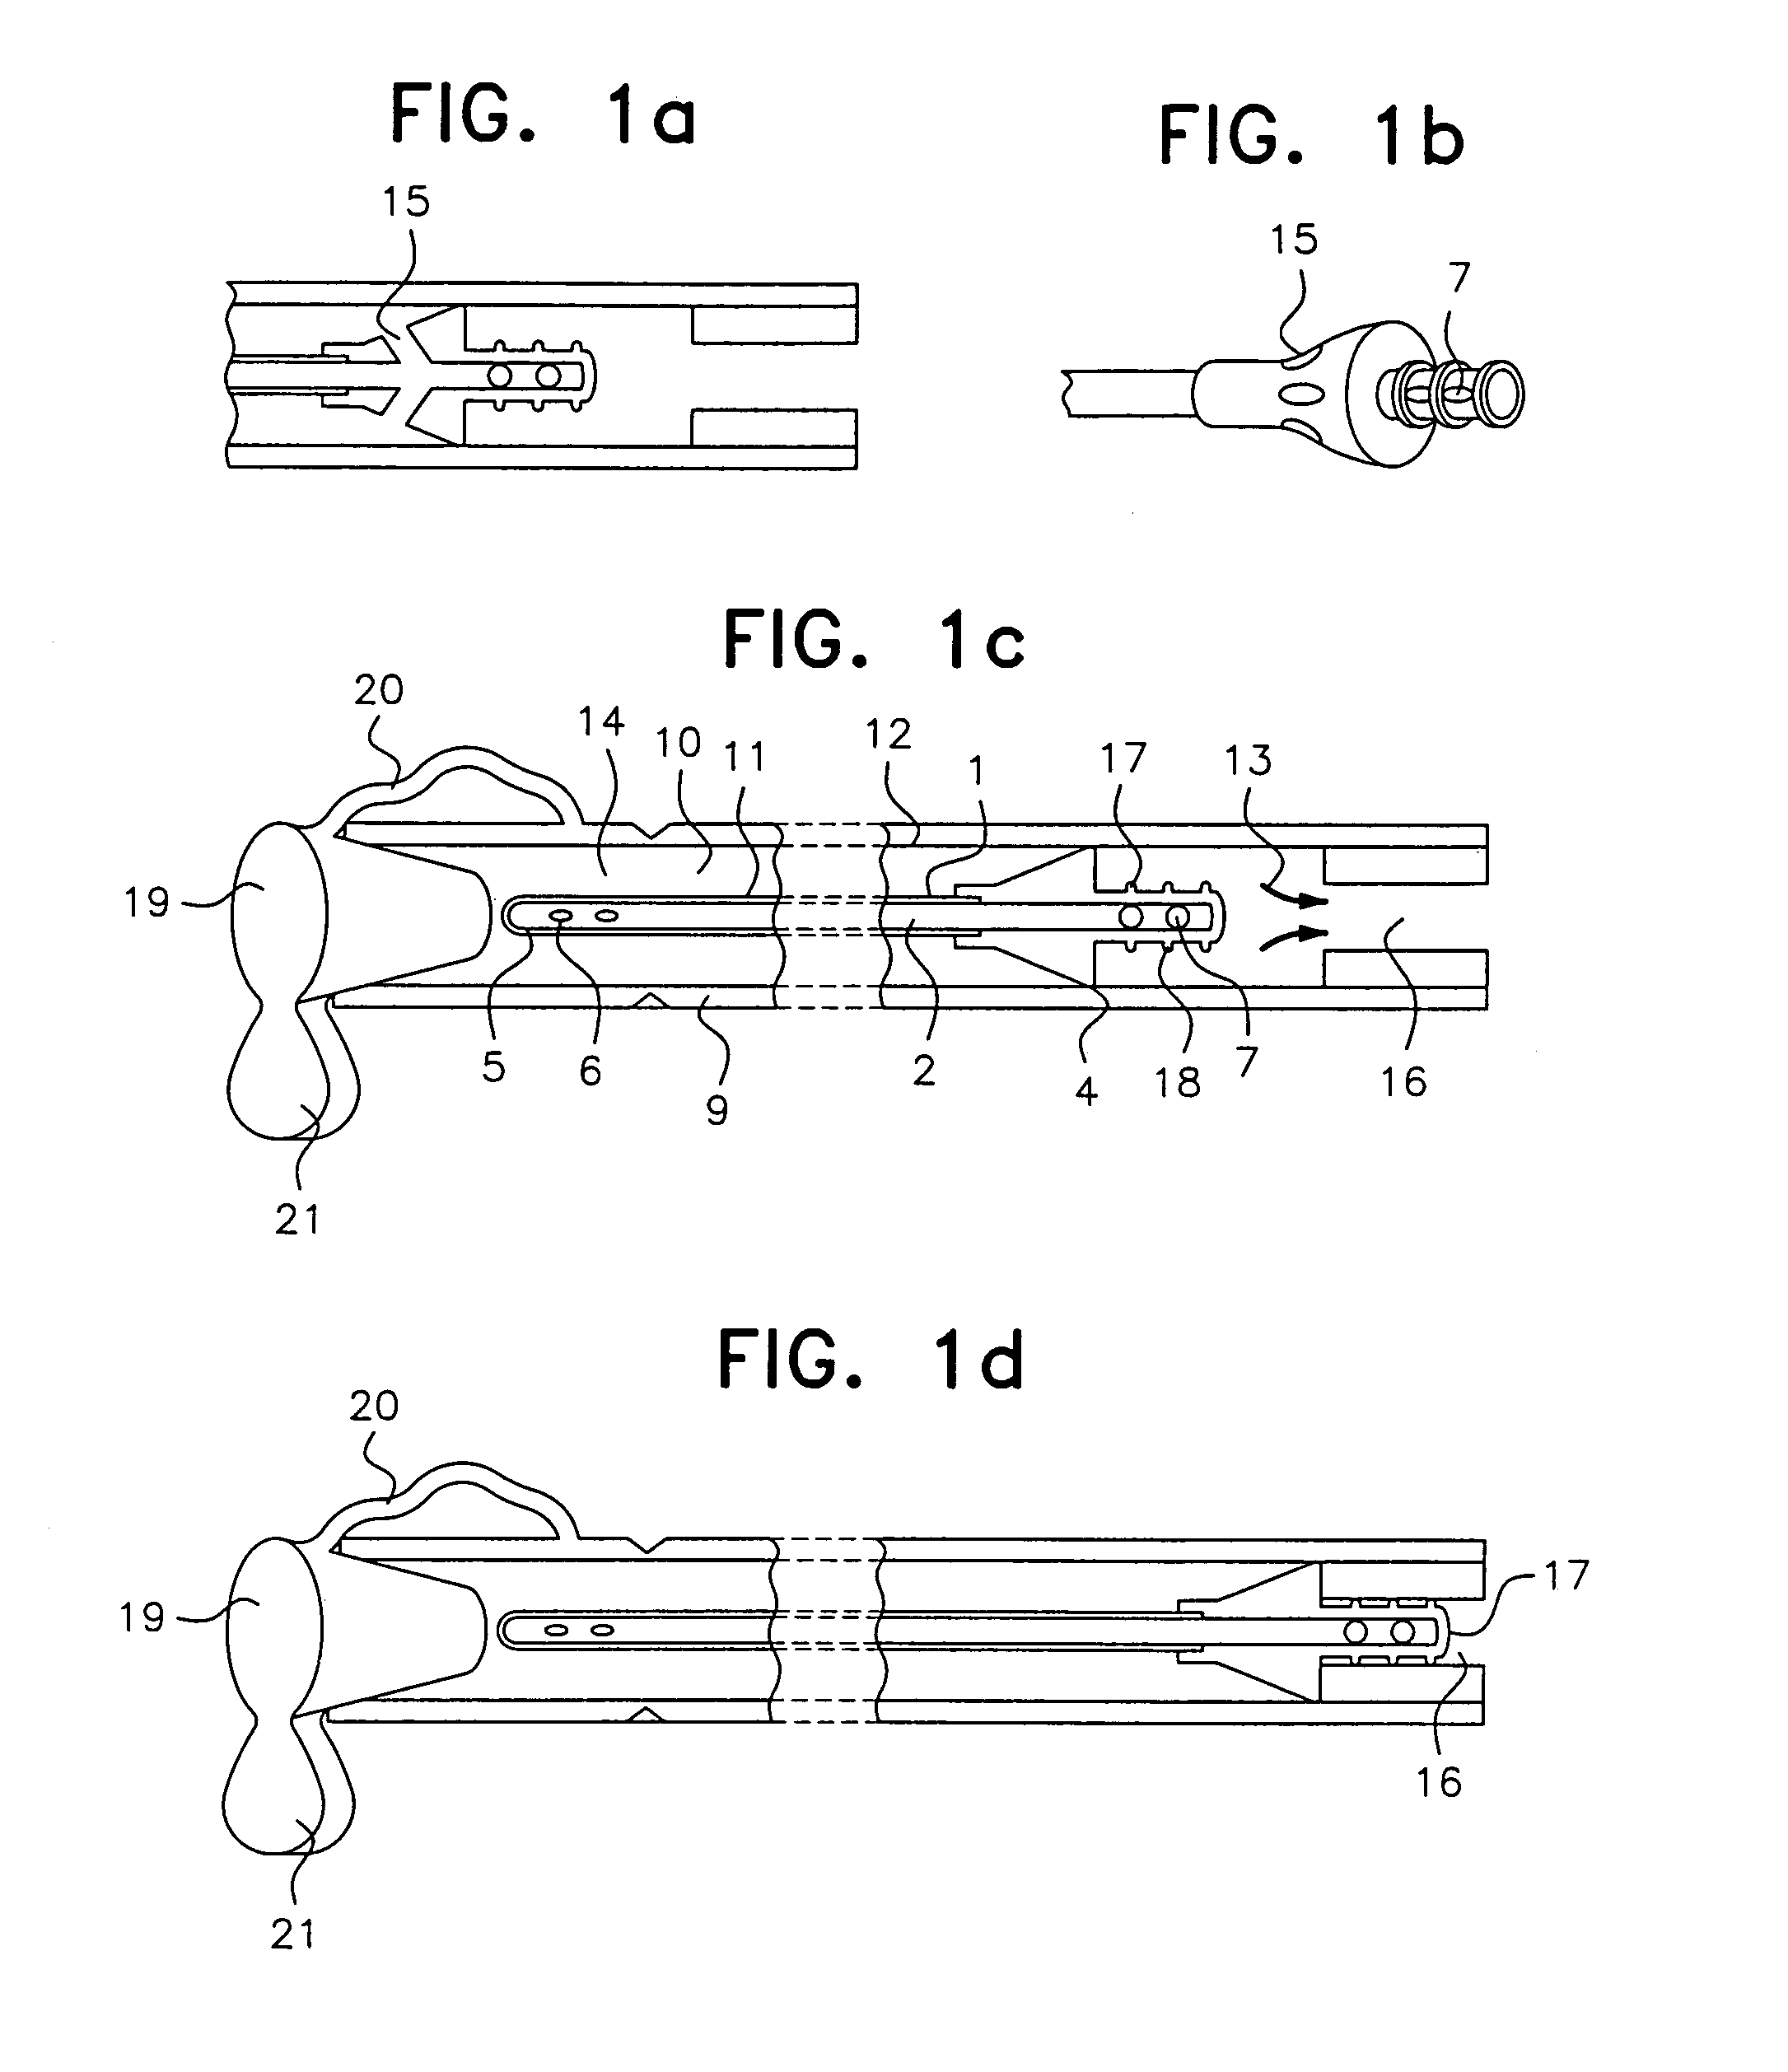 Catheter assembly including a catheter applicator